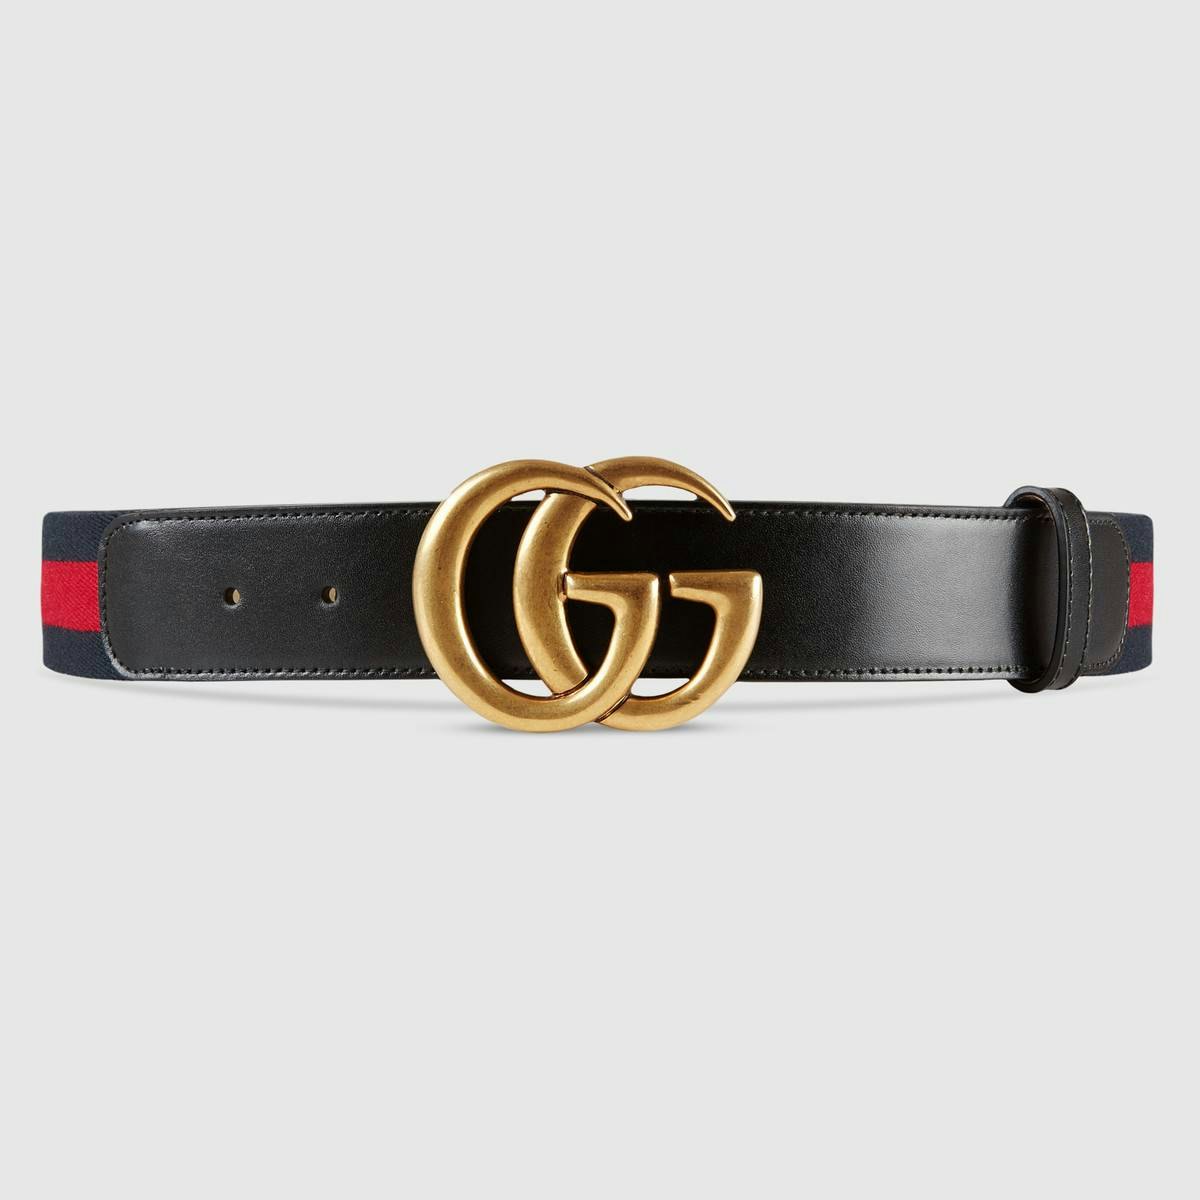 belts with cg on them